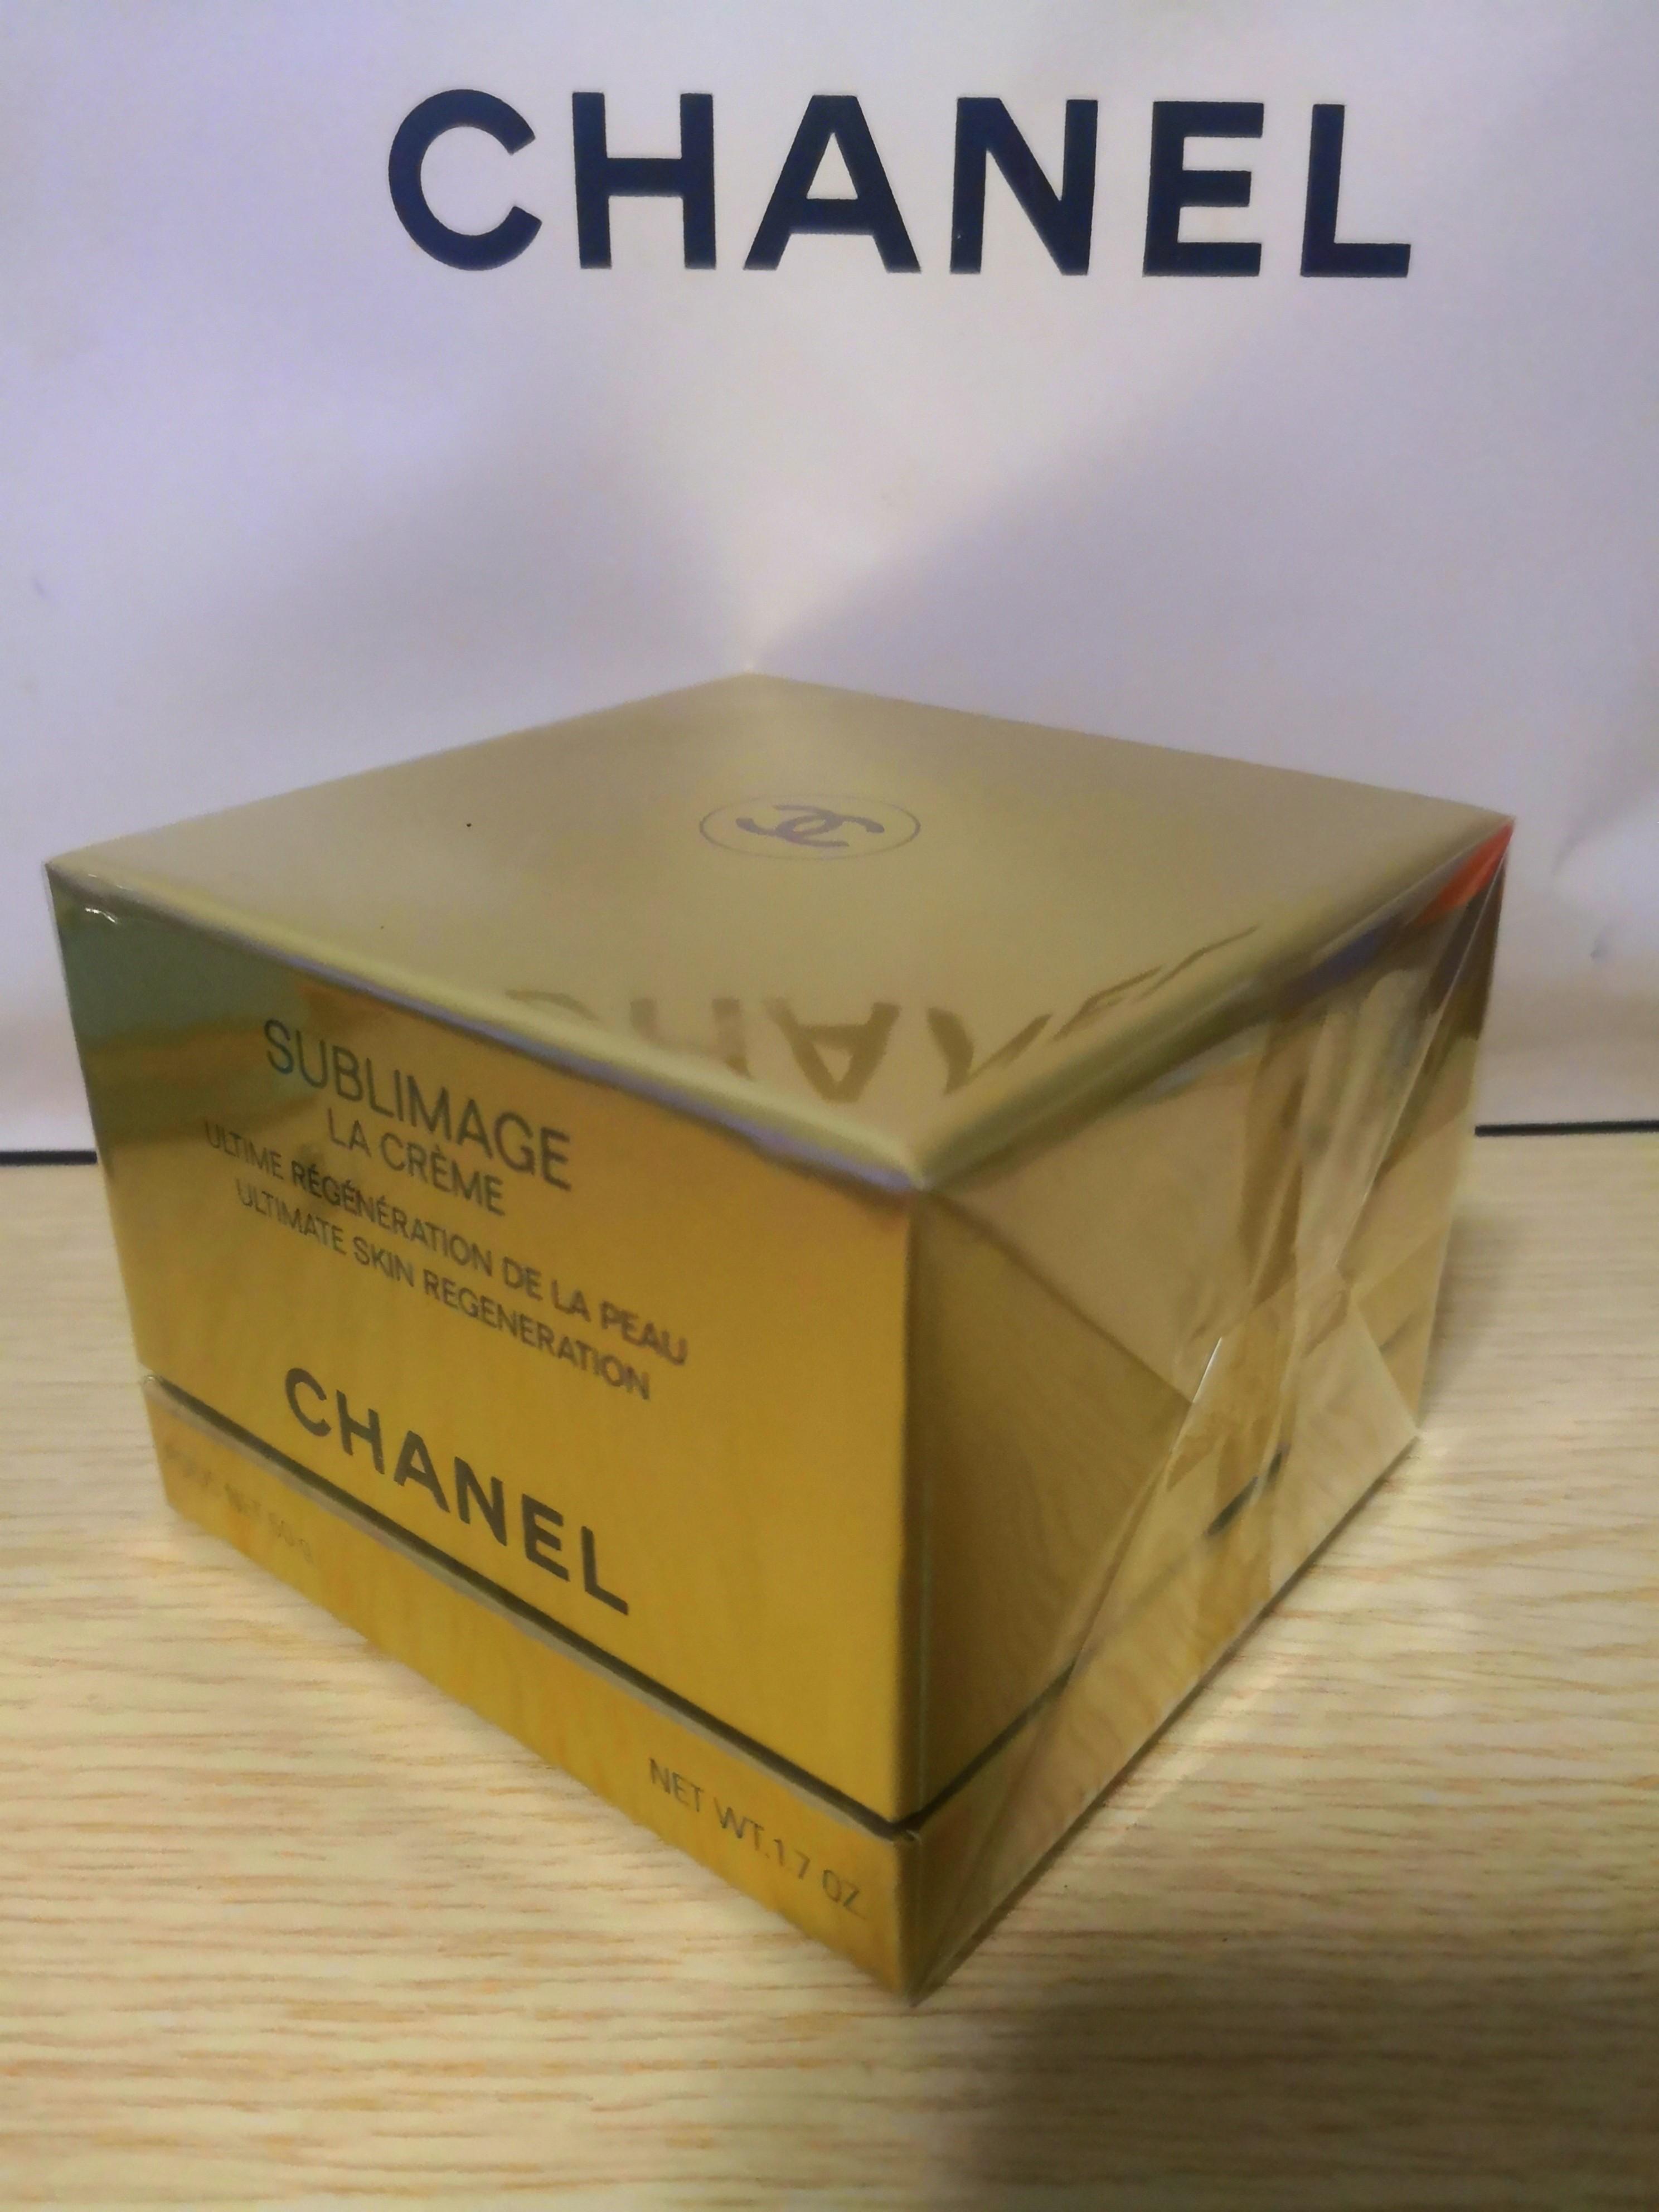 CHANEL Sublimage La Creme 50g, Beauty & Personal Care, Face, Face Care on  Carousell